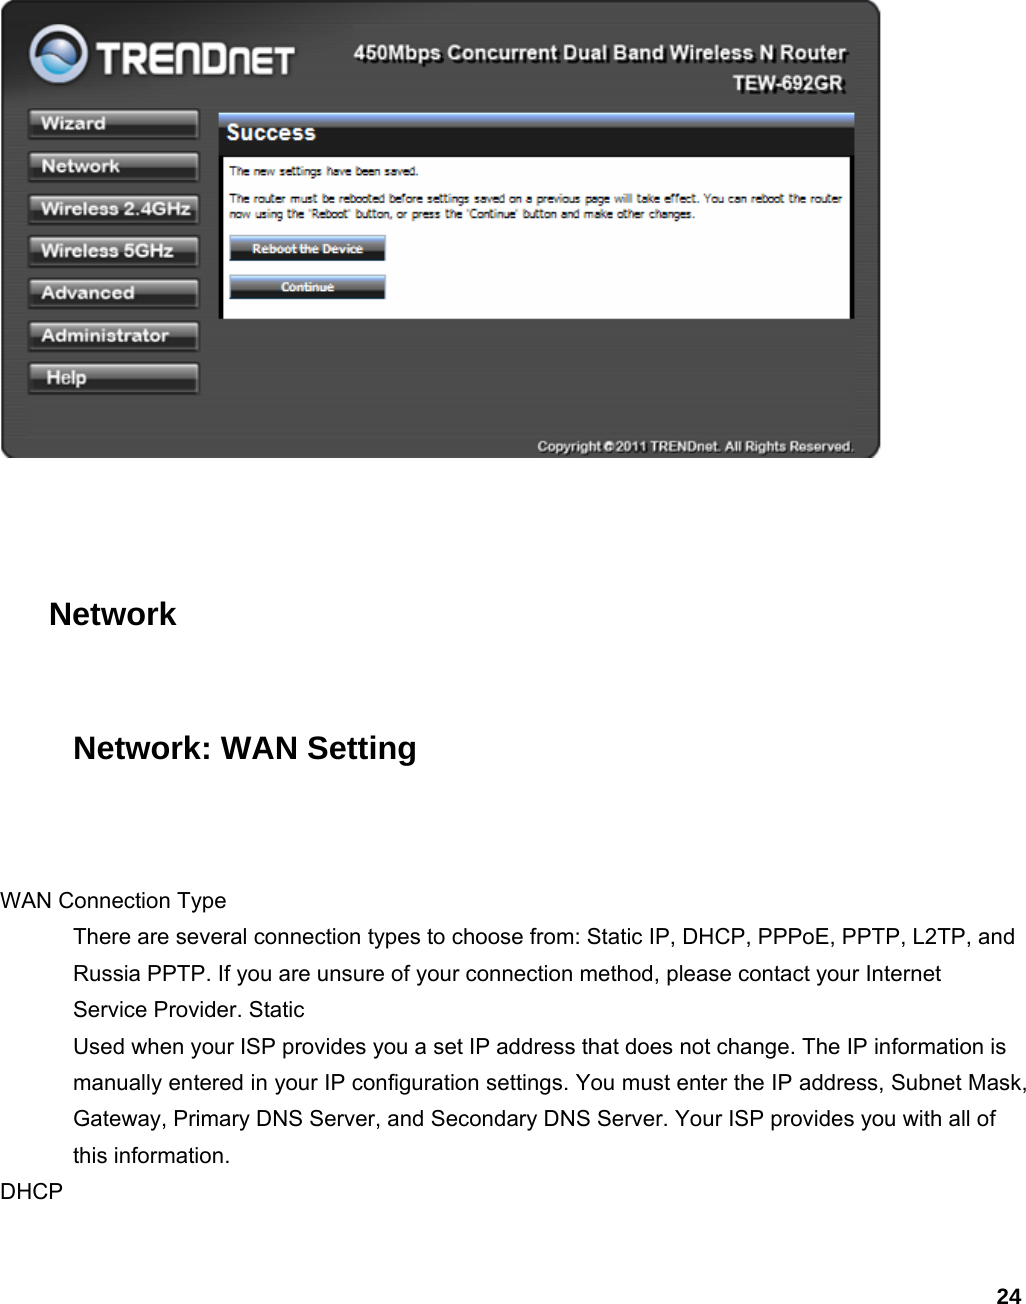 24    Network Network: WAN Setting  WAN Connection Type   There are several connection types to choose from: Static IP, DHCP, PPPoE, PPTP, L2TP, and Russia PPTP. If you are unsure of your connection method, please contact your Internet Service Provider. Static   Used when your ISP provides you a set IP address that does not change. The IP information is manually entered in your IP configuration settings. You must enter the IP address, Subnet Mask, Gateway, Primary DNS Server, and Secondary DNS Server. Your ISP provides you with all of this information.   DHCP  